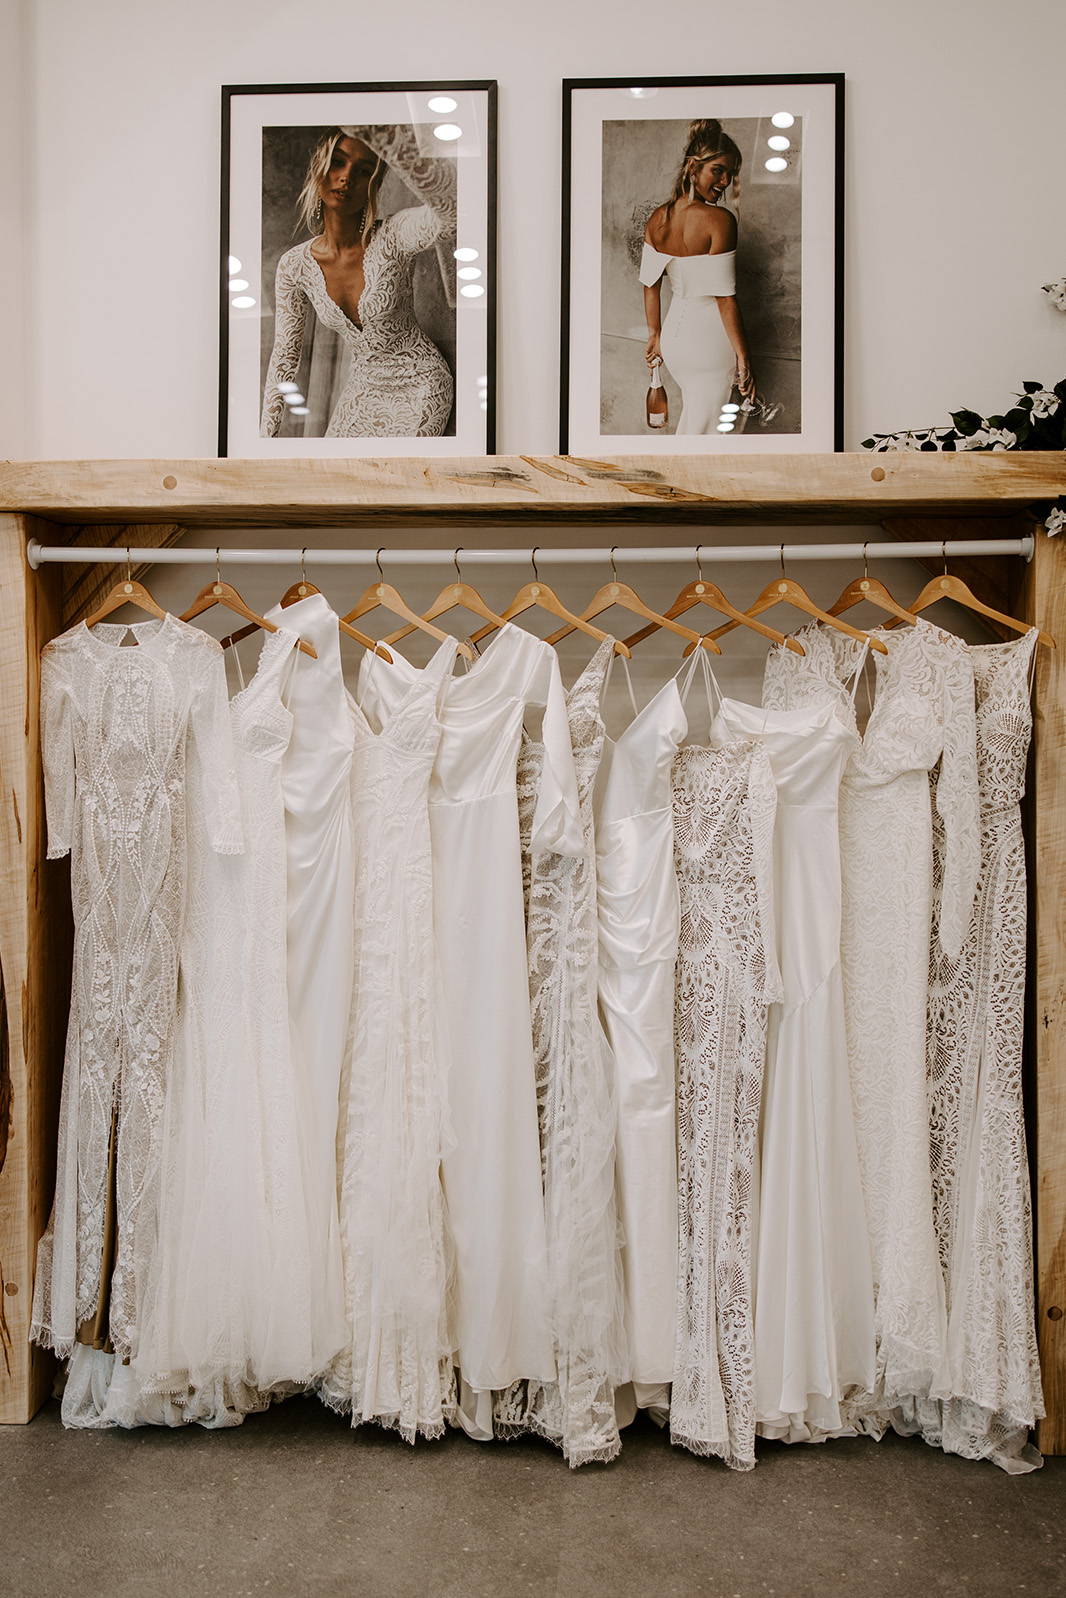 Grace Loves Lace wedding gowns hanging on wooden hangers